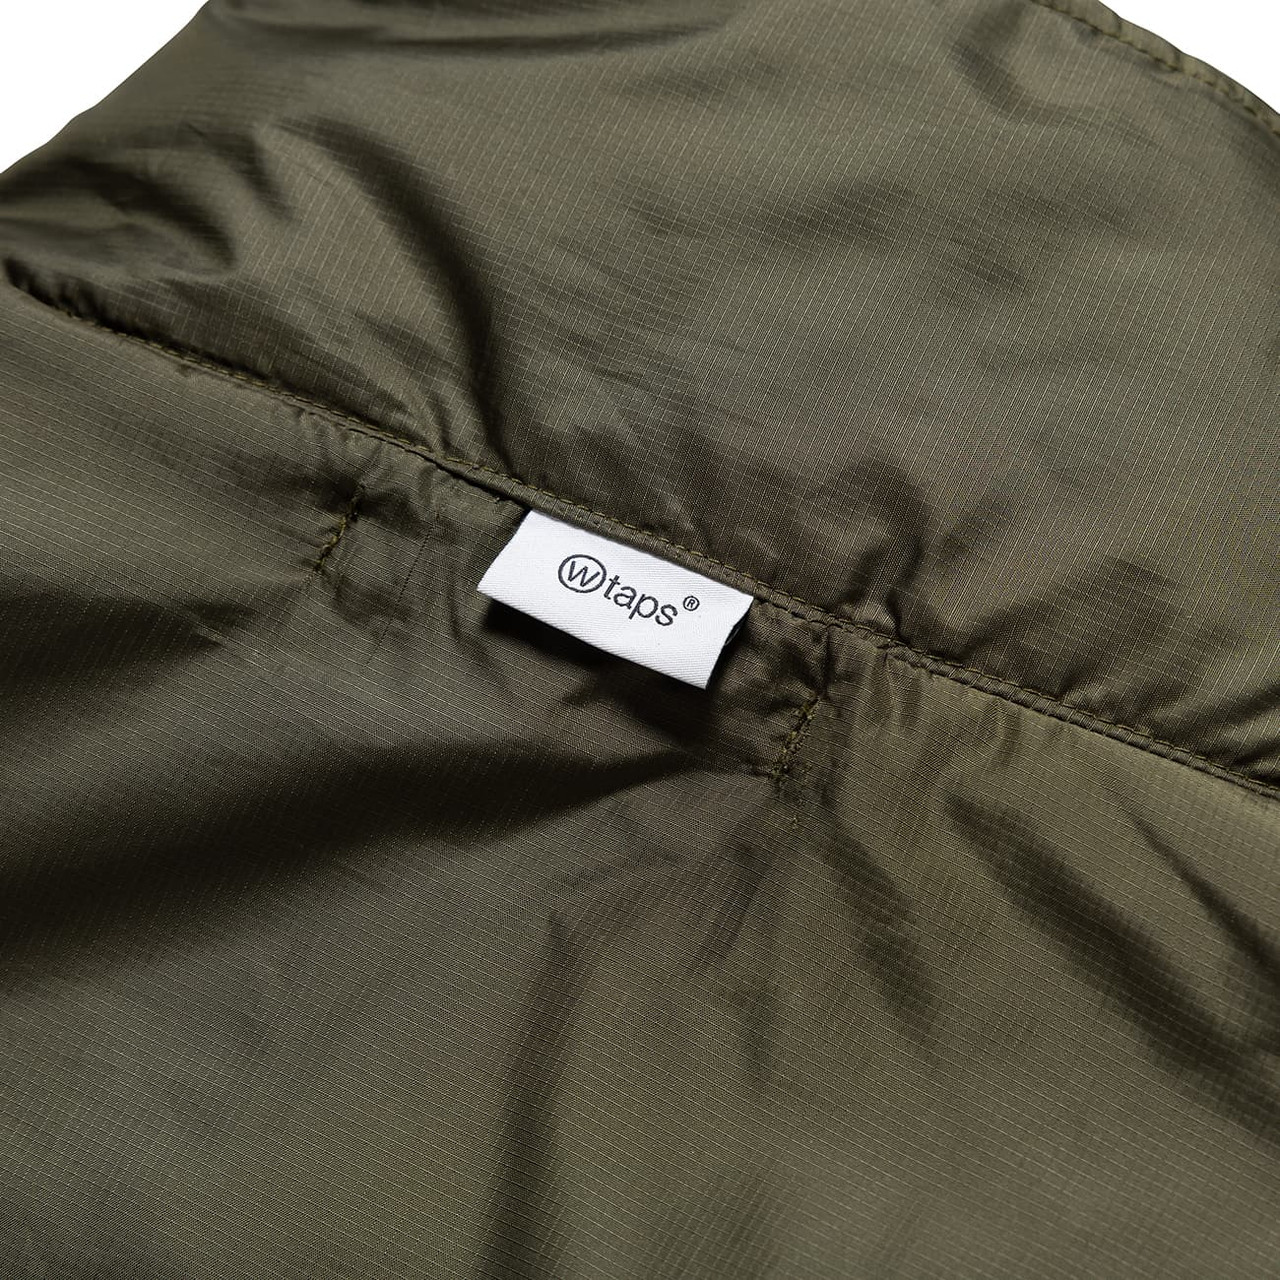 WTAPS Jacket TRACK / PADDED / JACKET / POLY. RIPSTOP. PROTECT